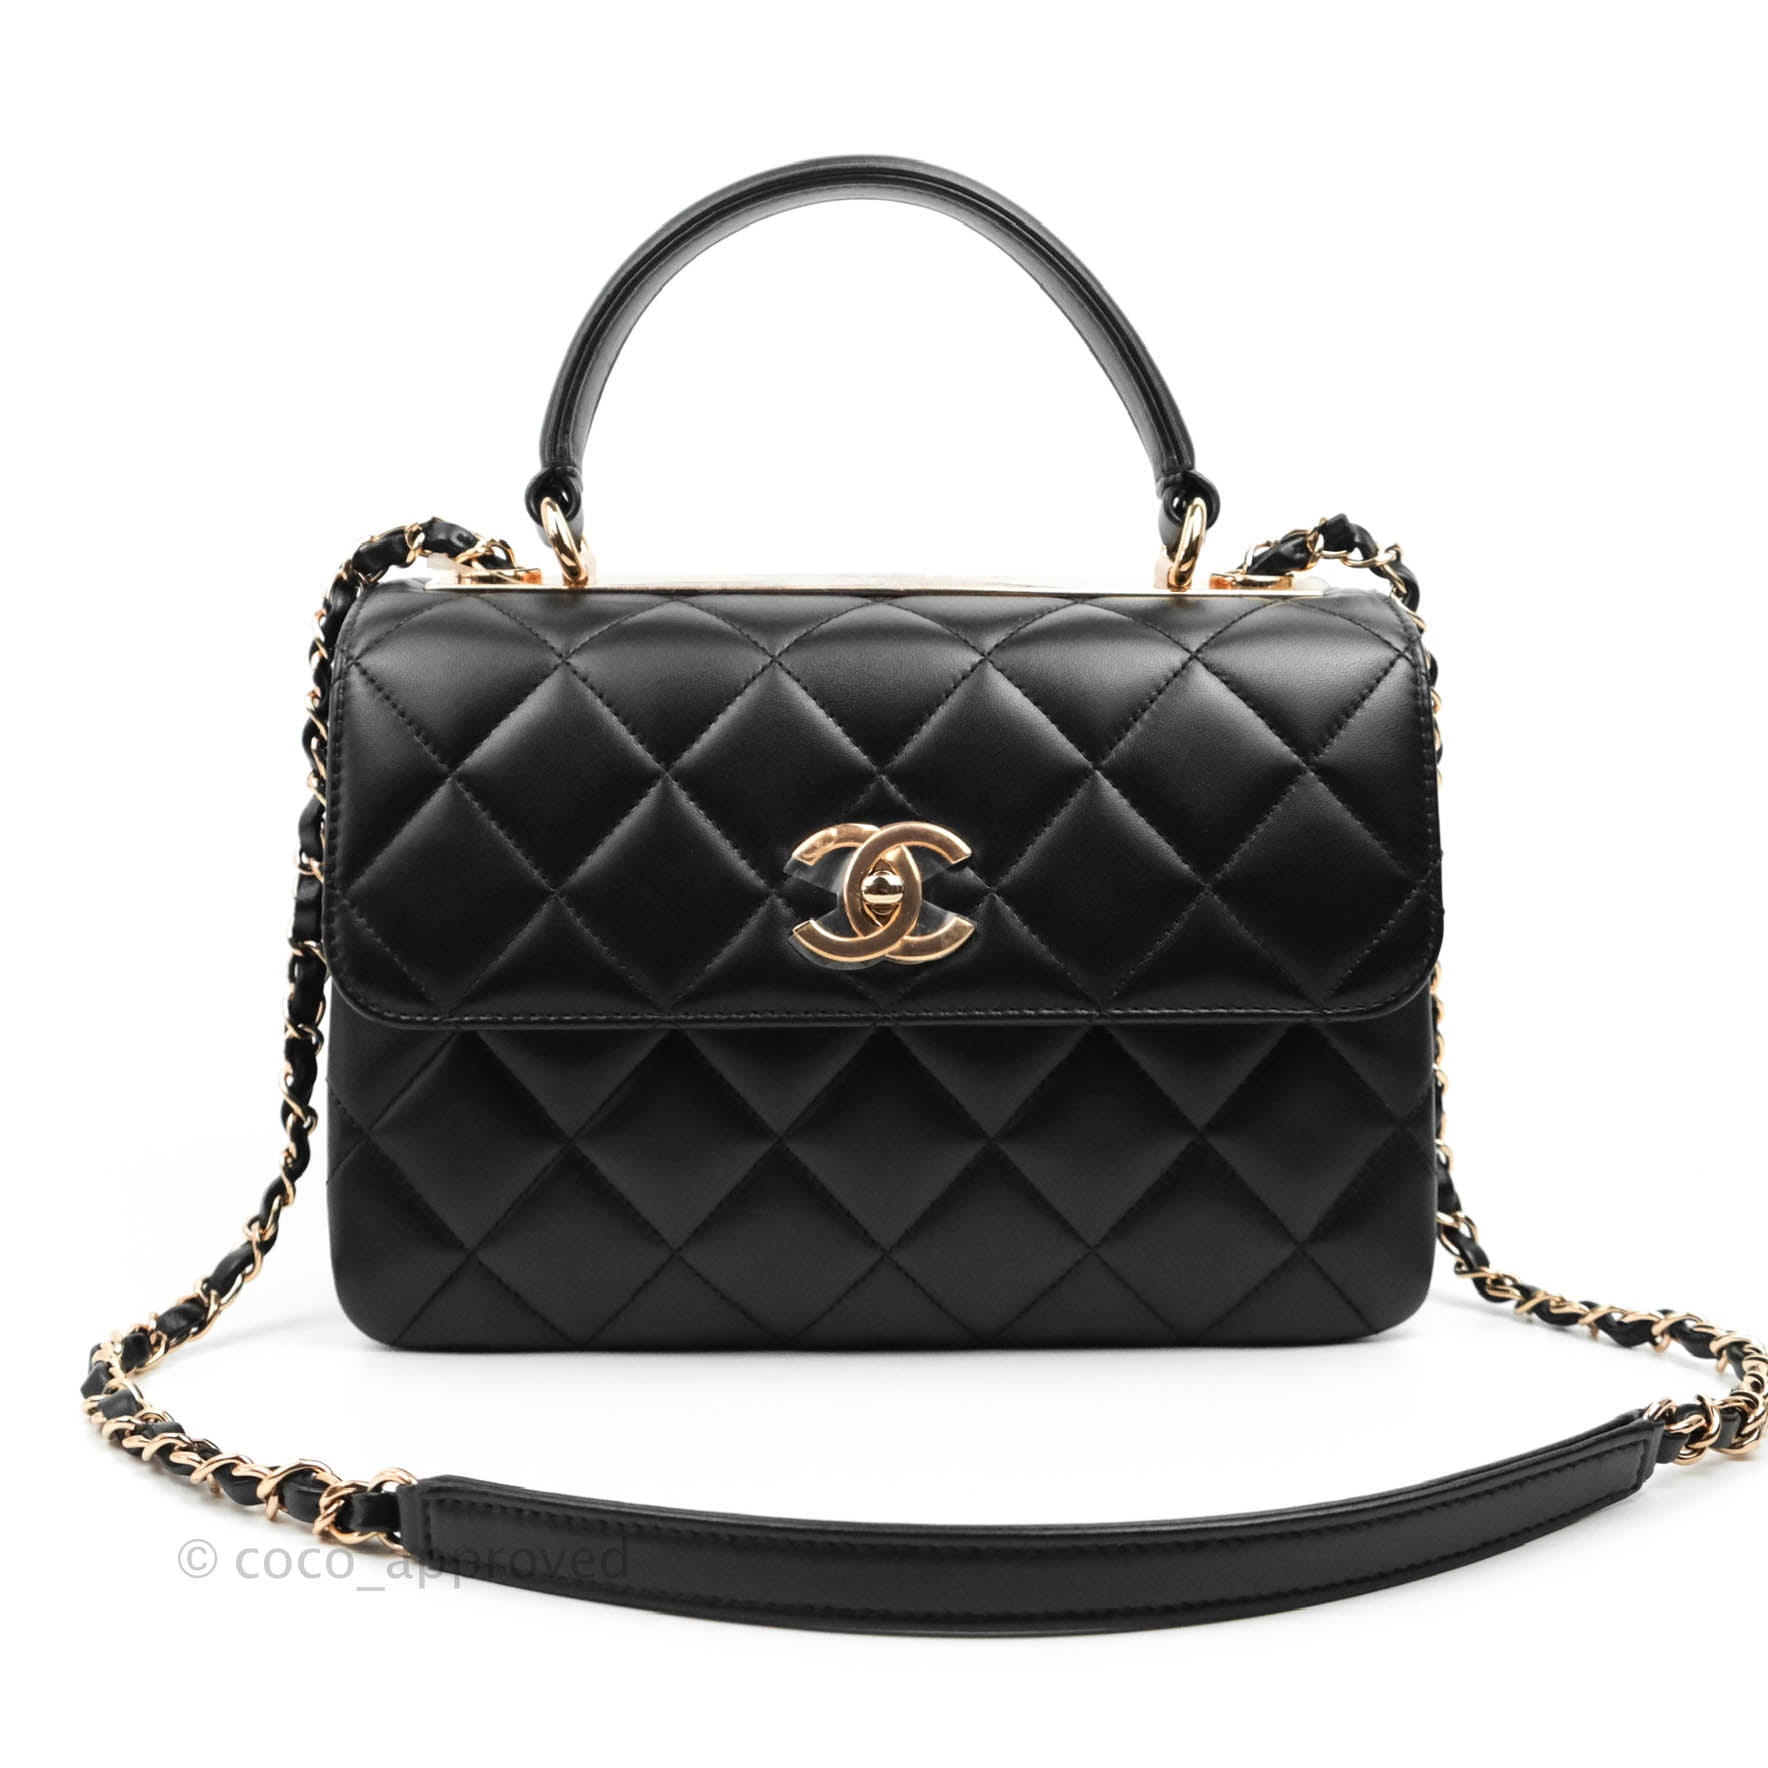 chanel bag with rose gold hardware